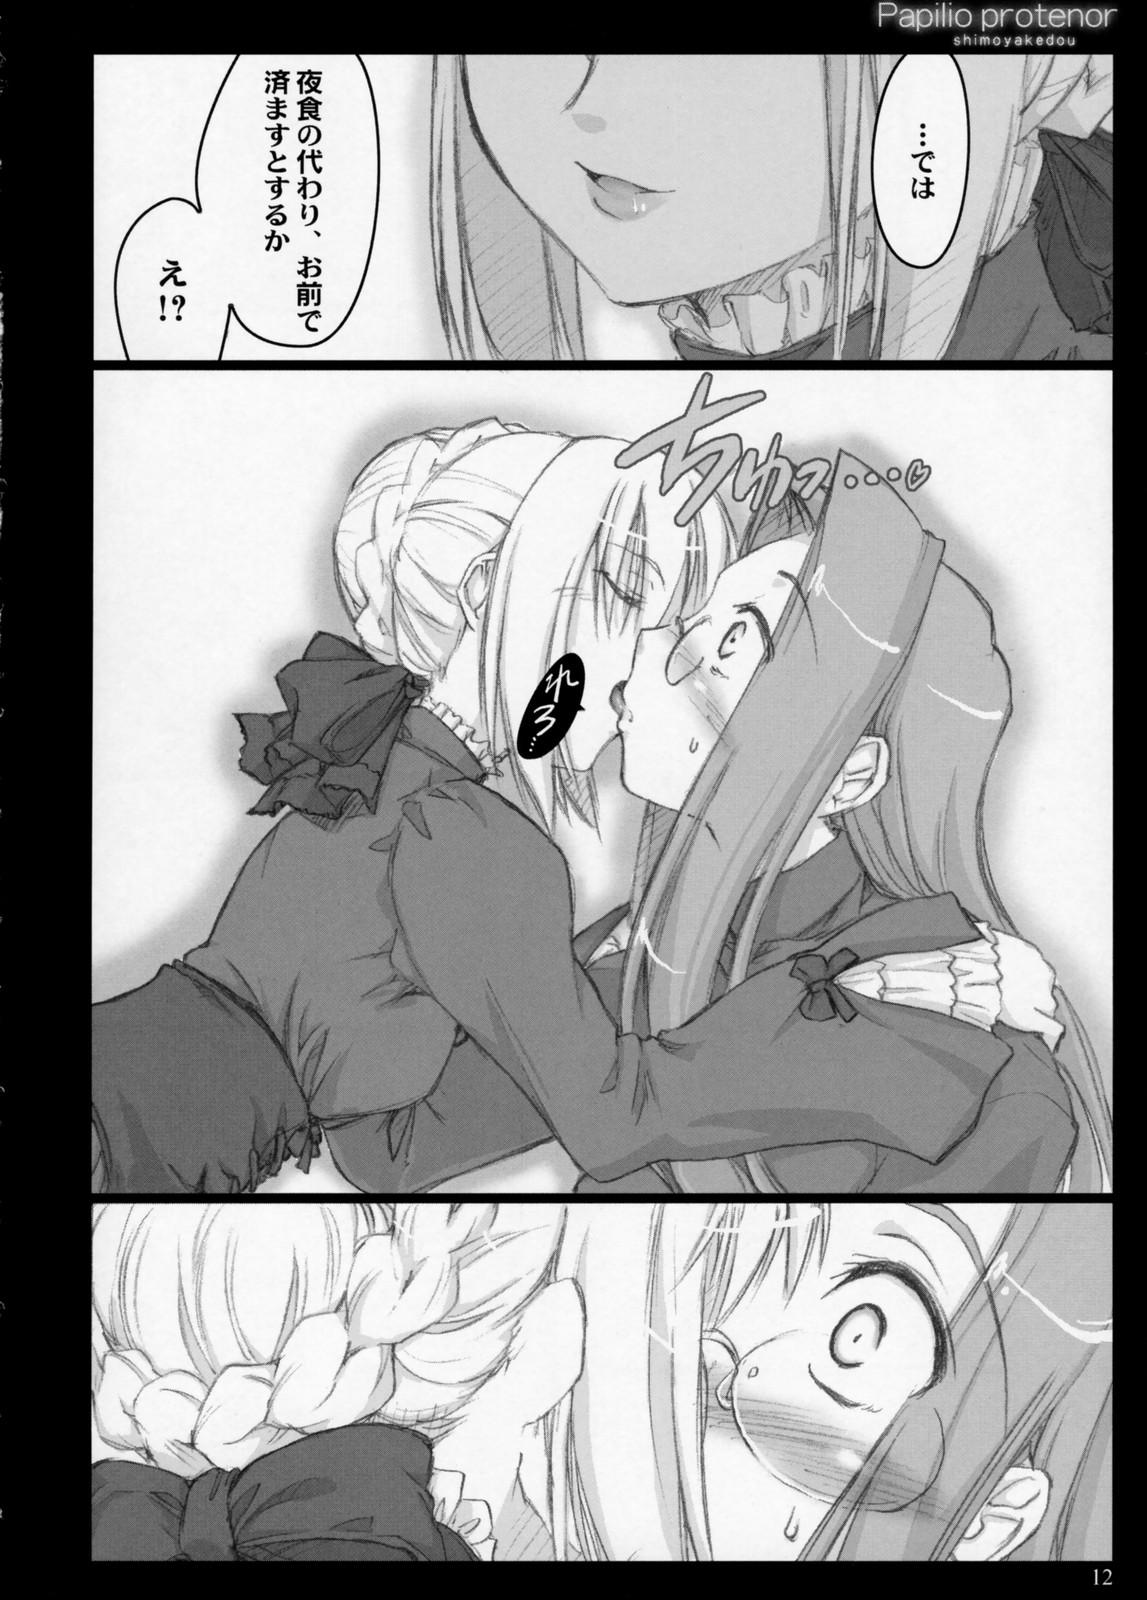 Eating Pussy Papilio Protenor - Fate stay night Bro - Page 11